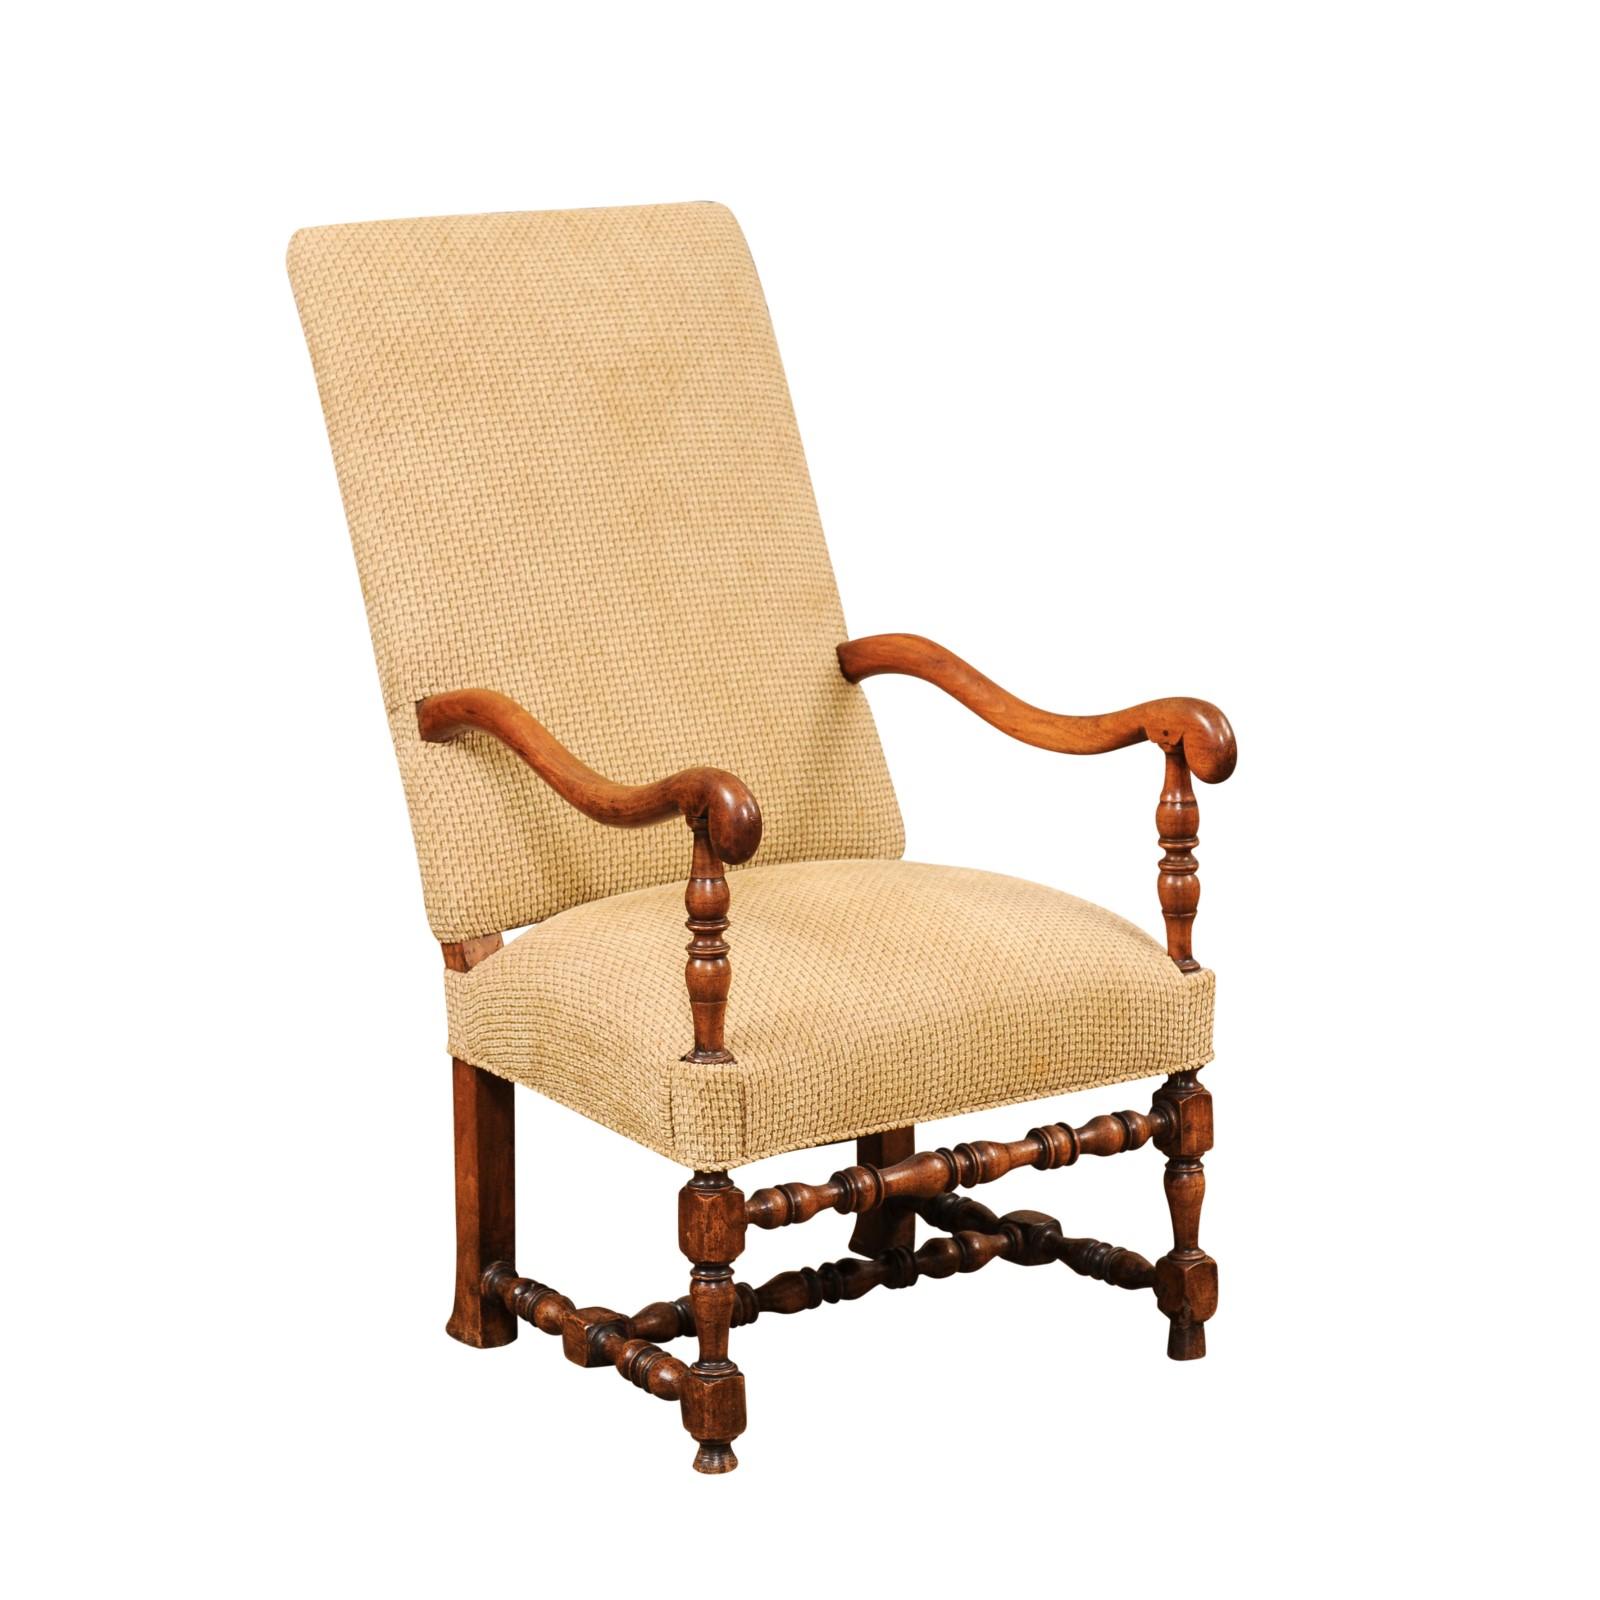 A single French Louis XIII style walnut armchair from the 19th century with large scrolling arms and turned base. This single French Louis XIII style walnut armchair, dating back to the 19th century, is a magnificent example of antique French